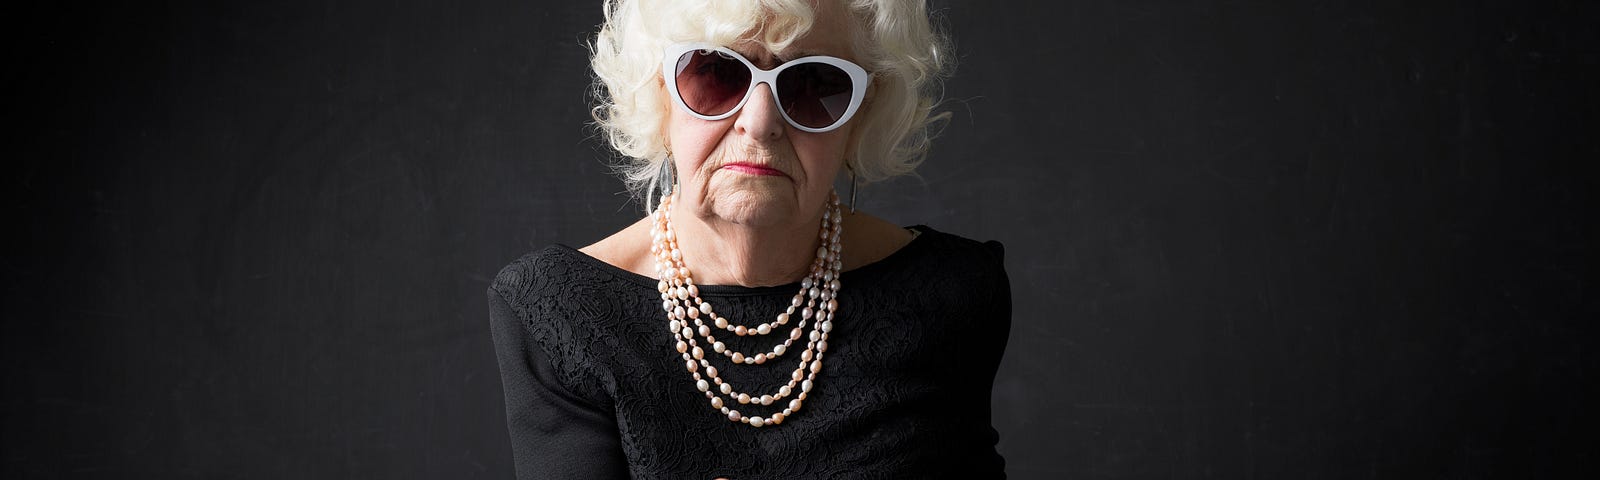 A wealthy elderly woman wearing pearls and sun glasses looks straight into the camera and gives the finger.